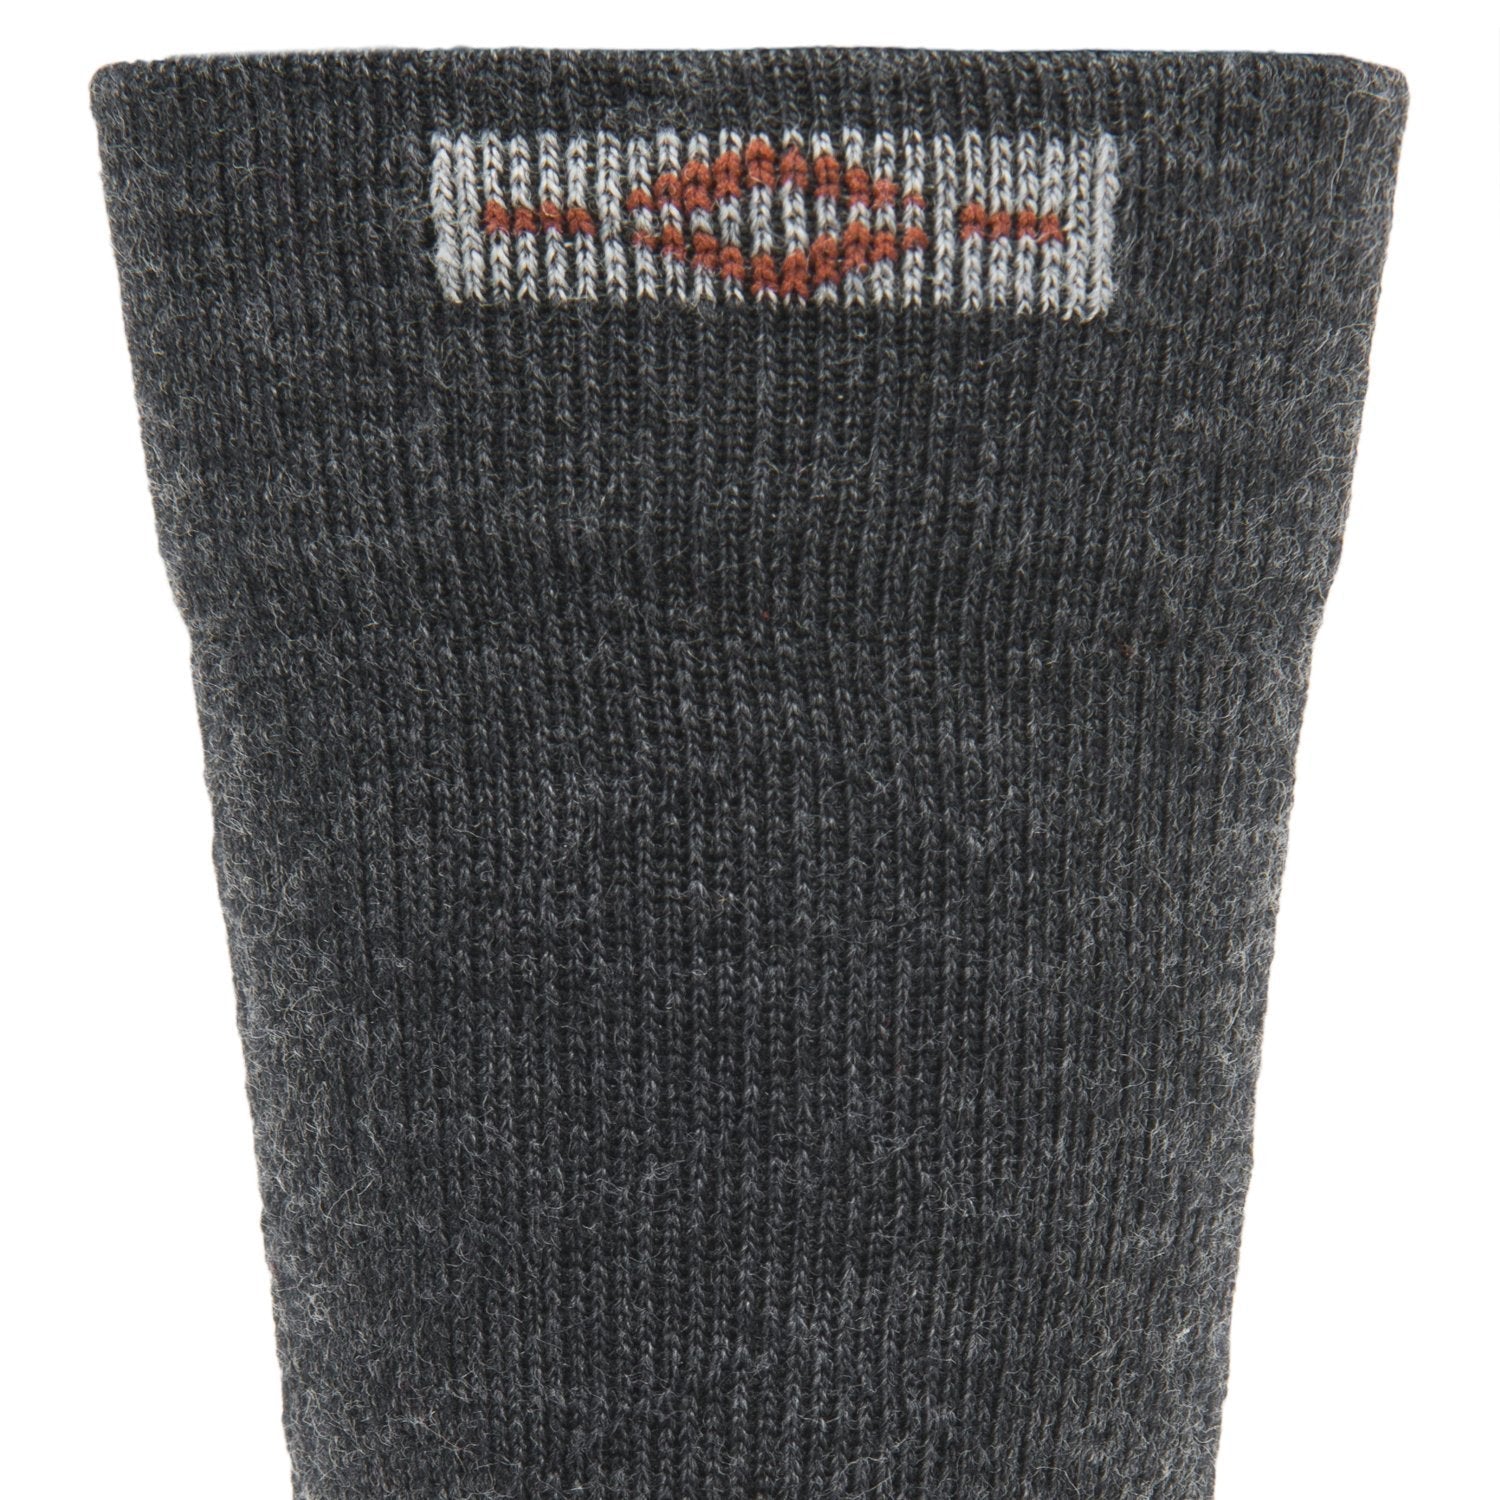 Axiom Lightweight Compression Crew Sock With Merino Wool - Oxford cuff perspective - made in The USA Wigwam Socks